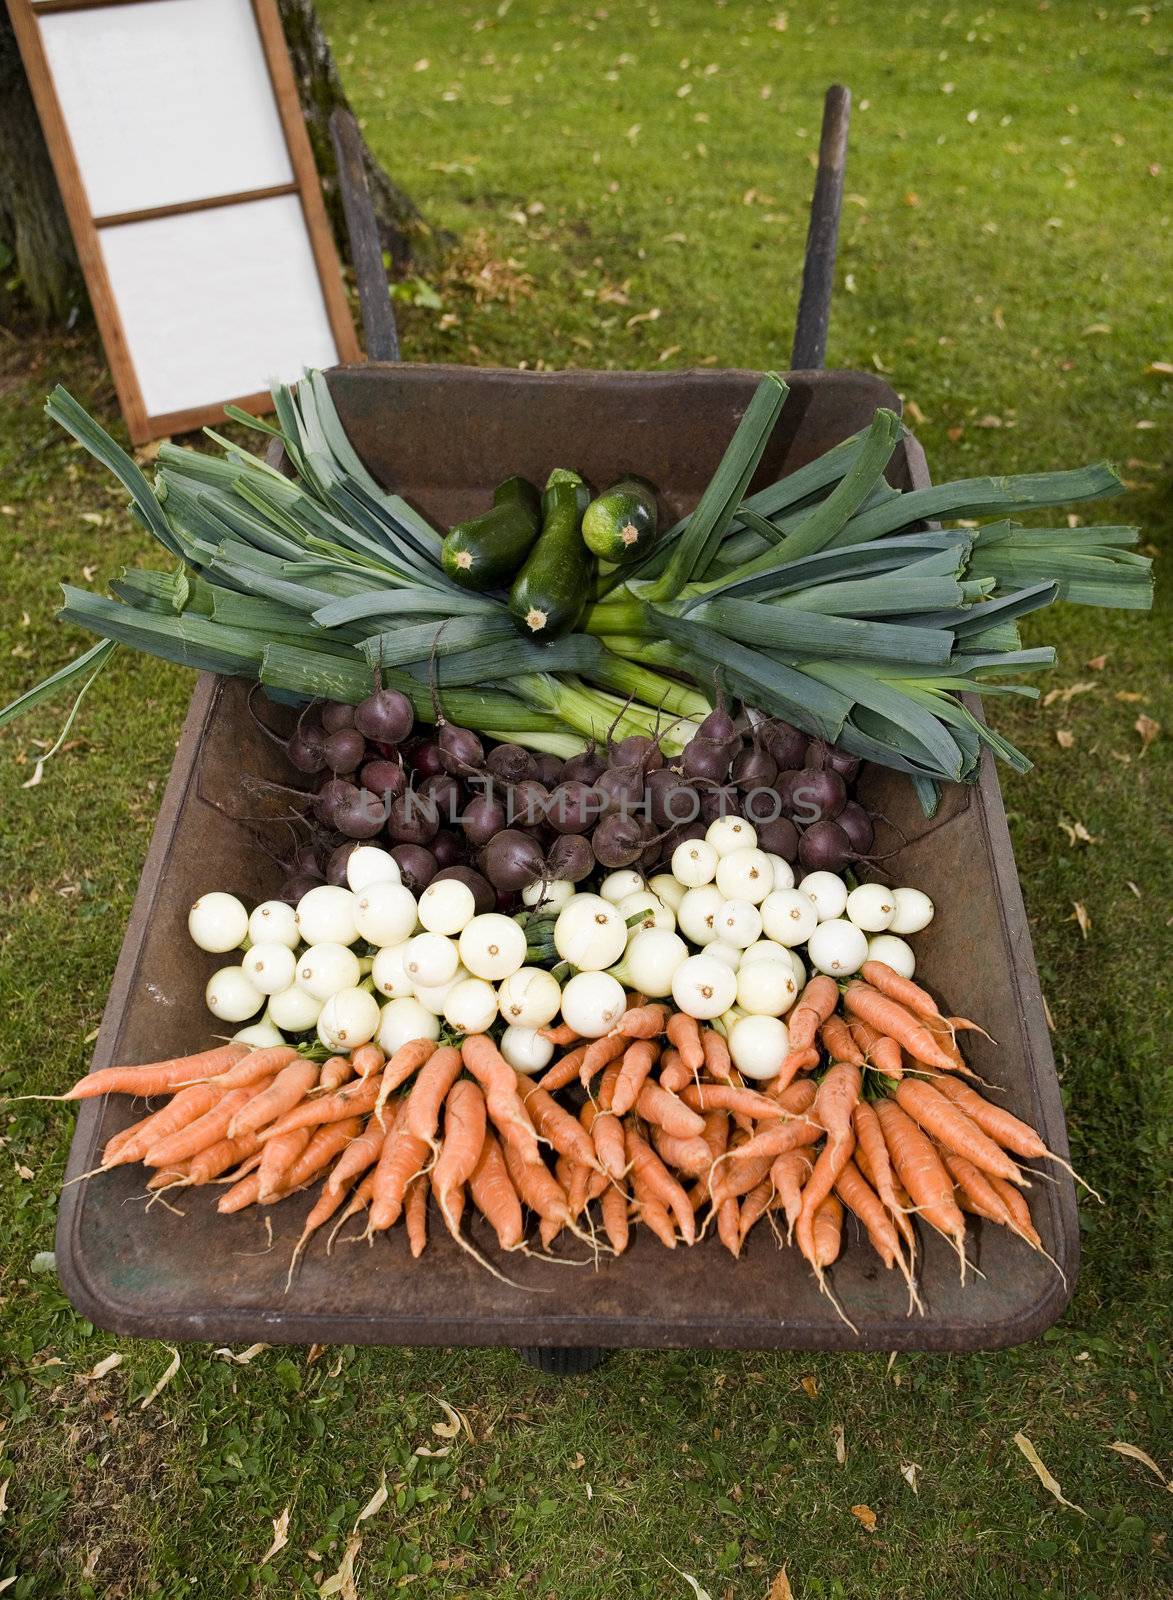 Worn Barrow with a large group of Vegetables